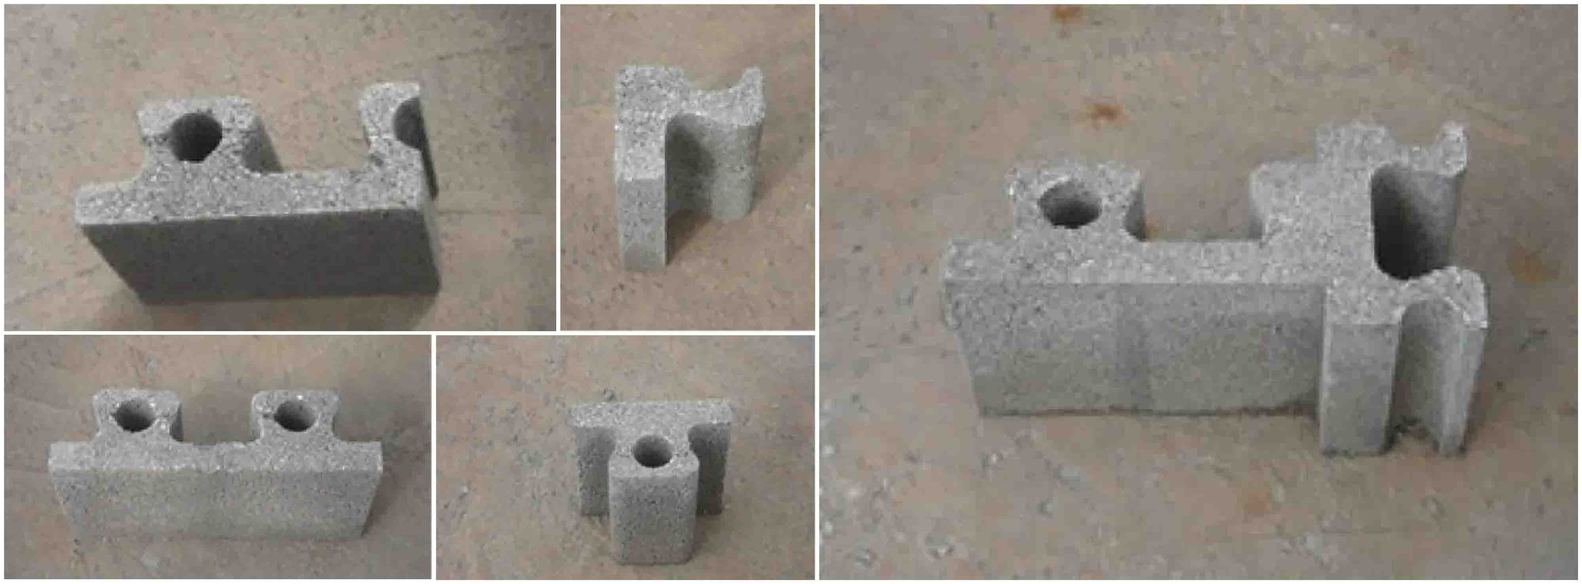 This Self-Build Concrete Block System Reduces Construction Time by 50%